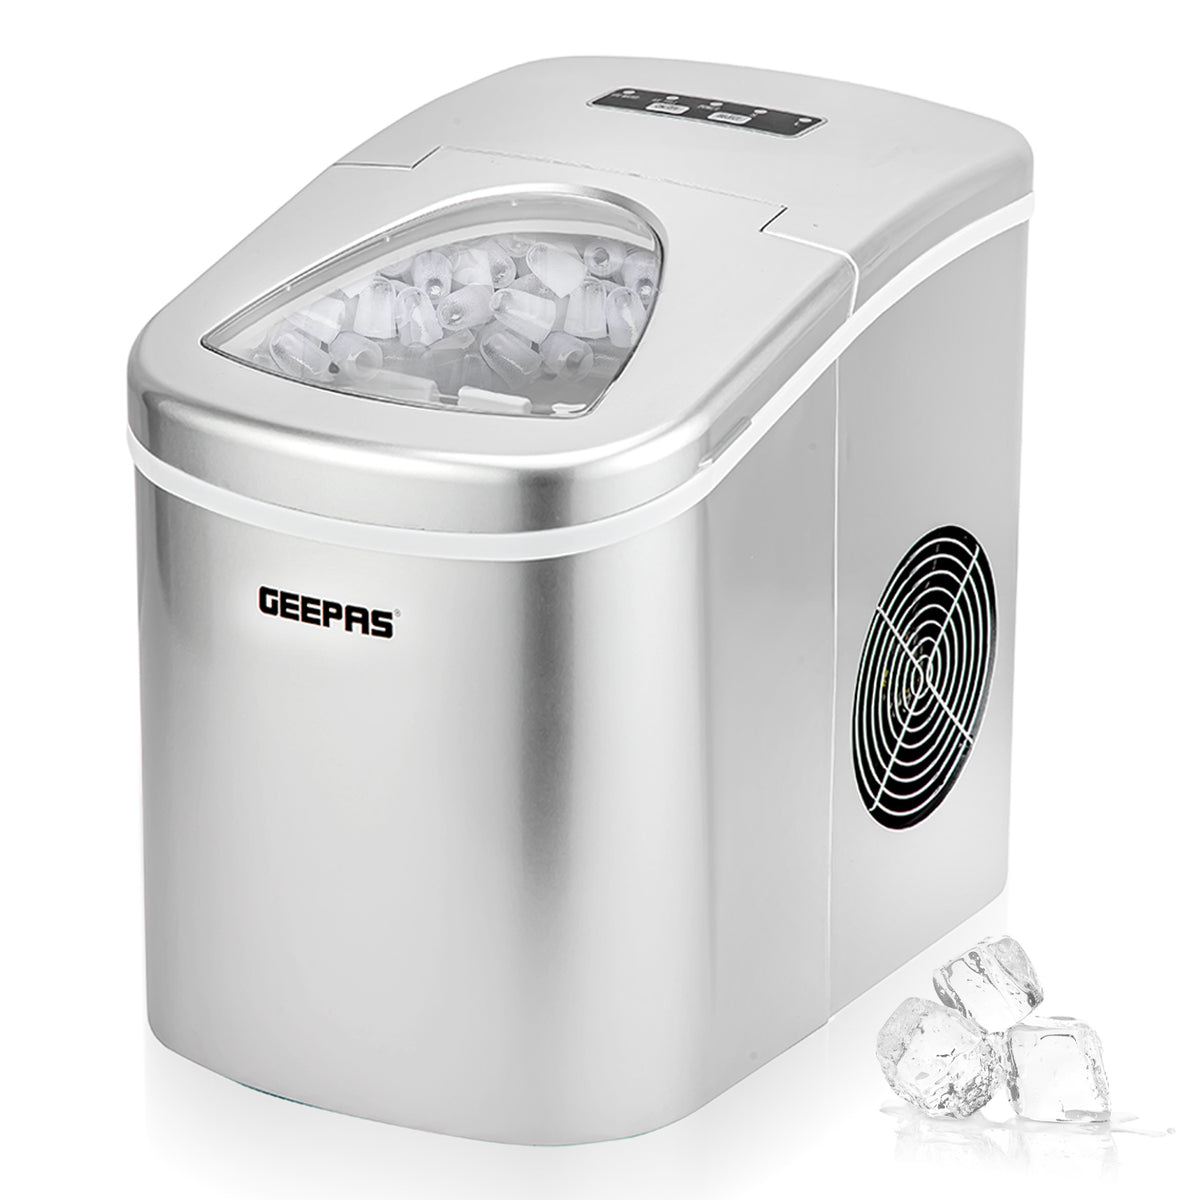 The image shows off the countertop silver ice cube making machine on a white background with ice cubes inside of the machine